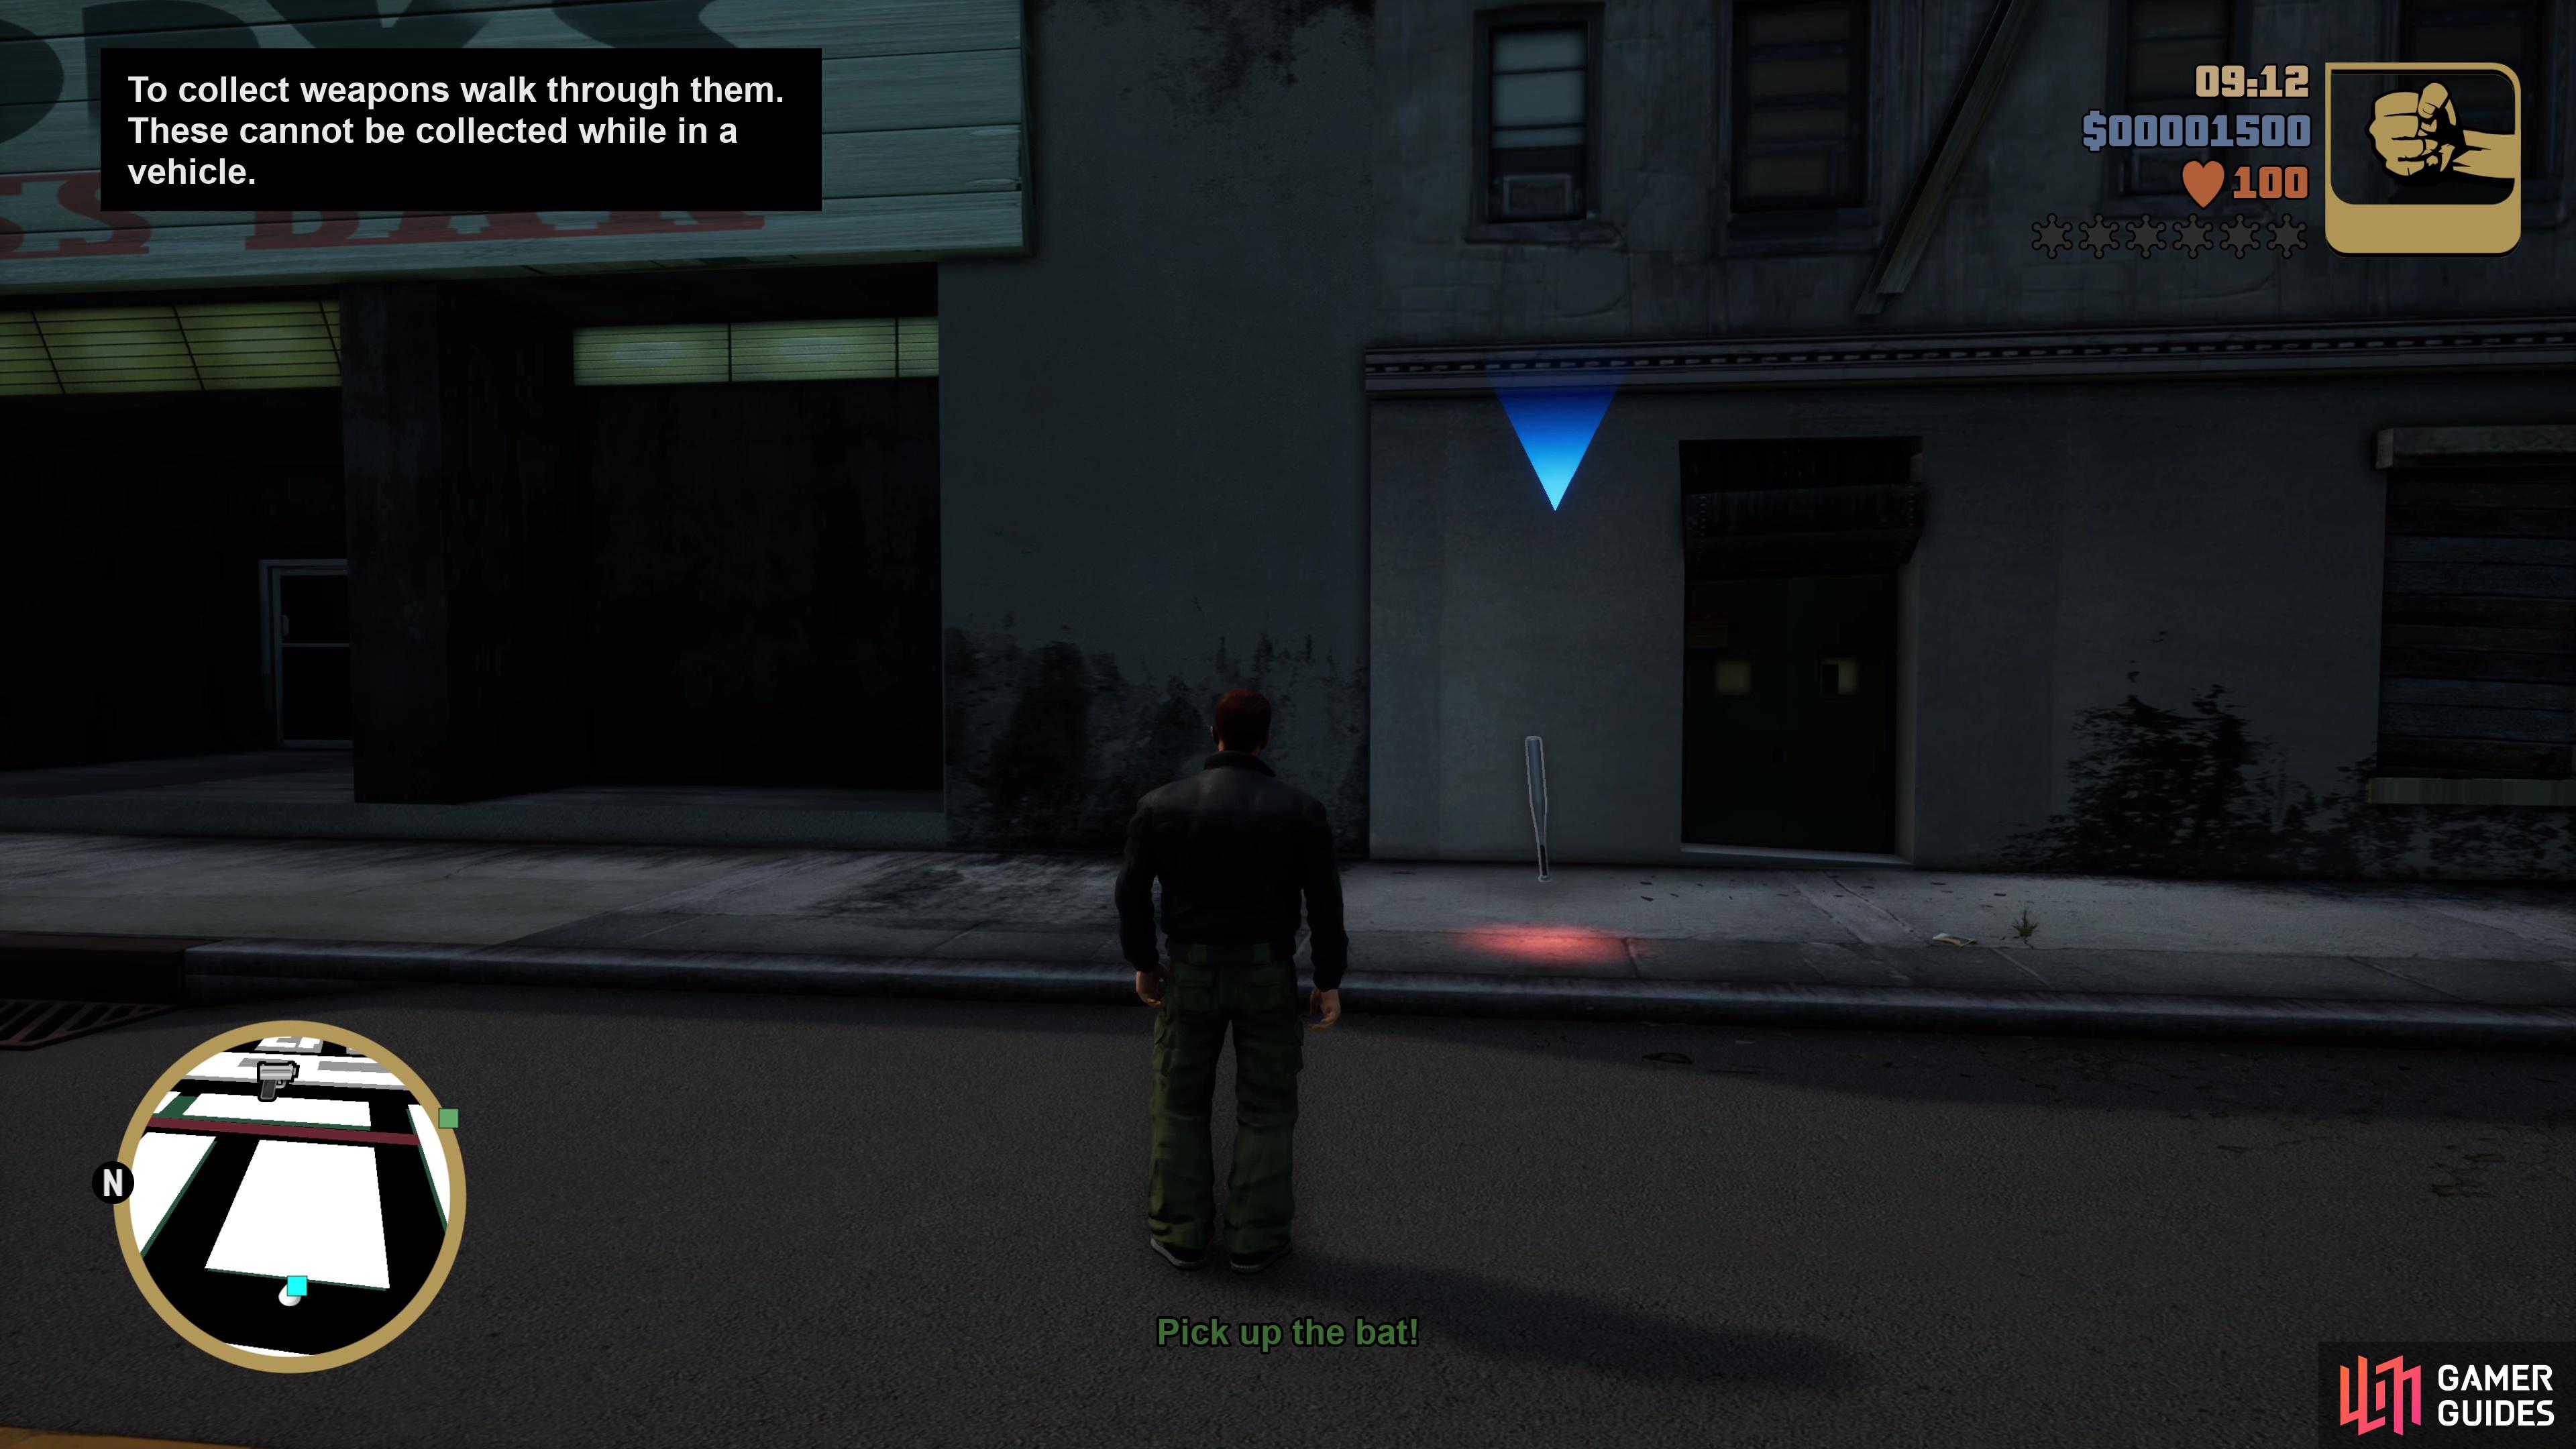 Park full of hidden packages (Mod) for Grand Theft Auto III 